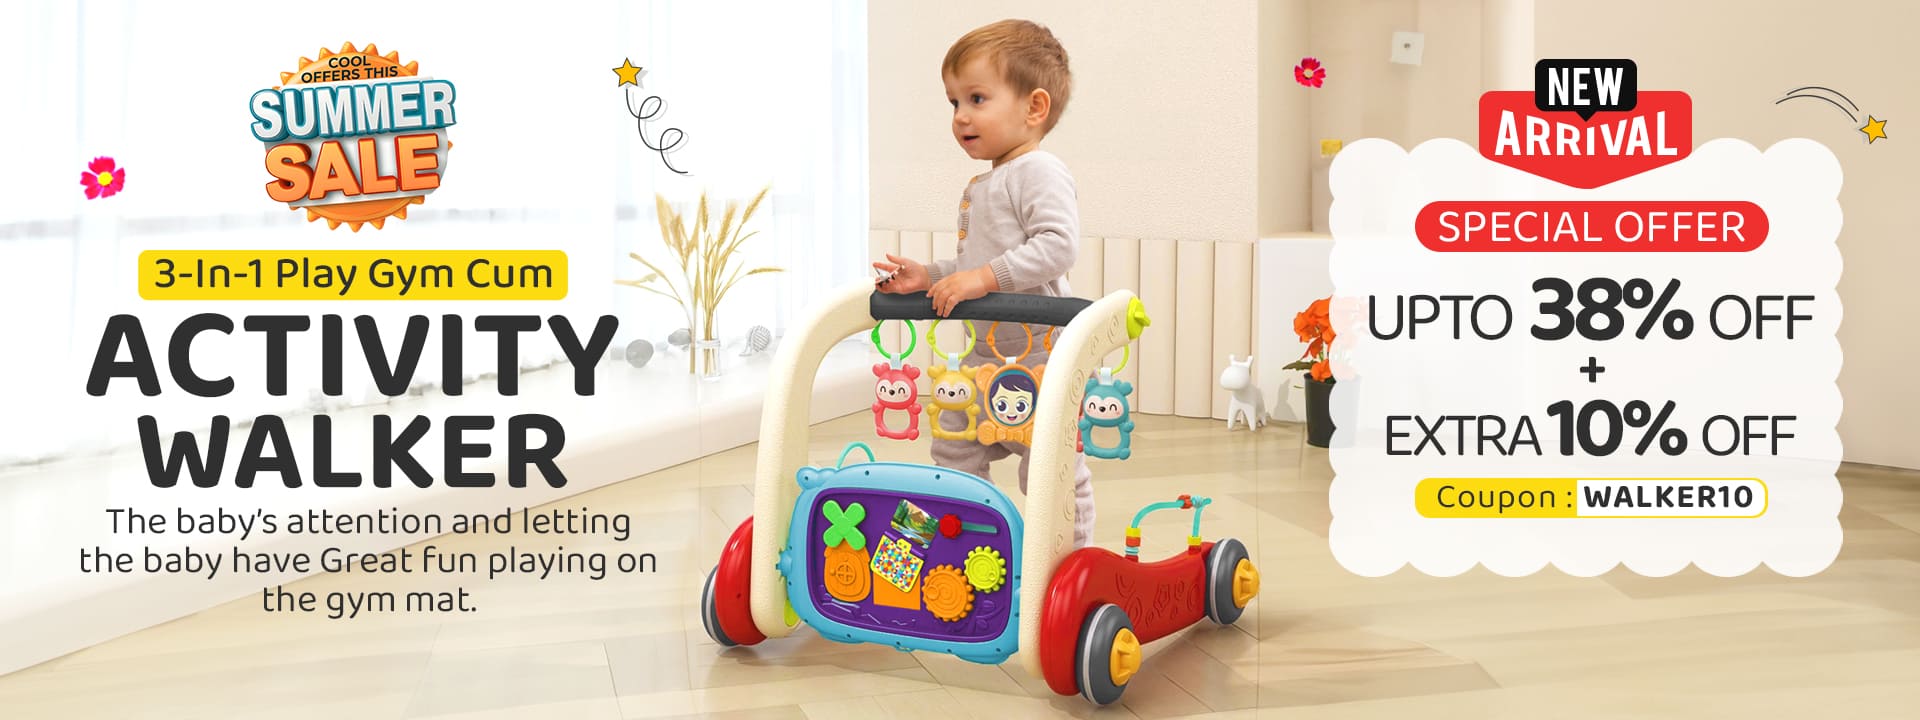 Baby Play gym activity walker